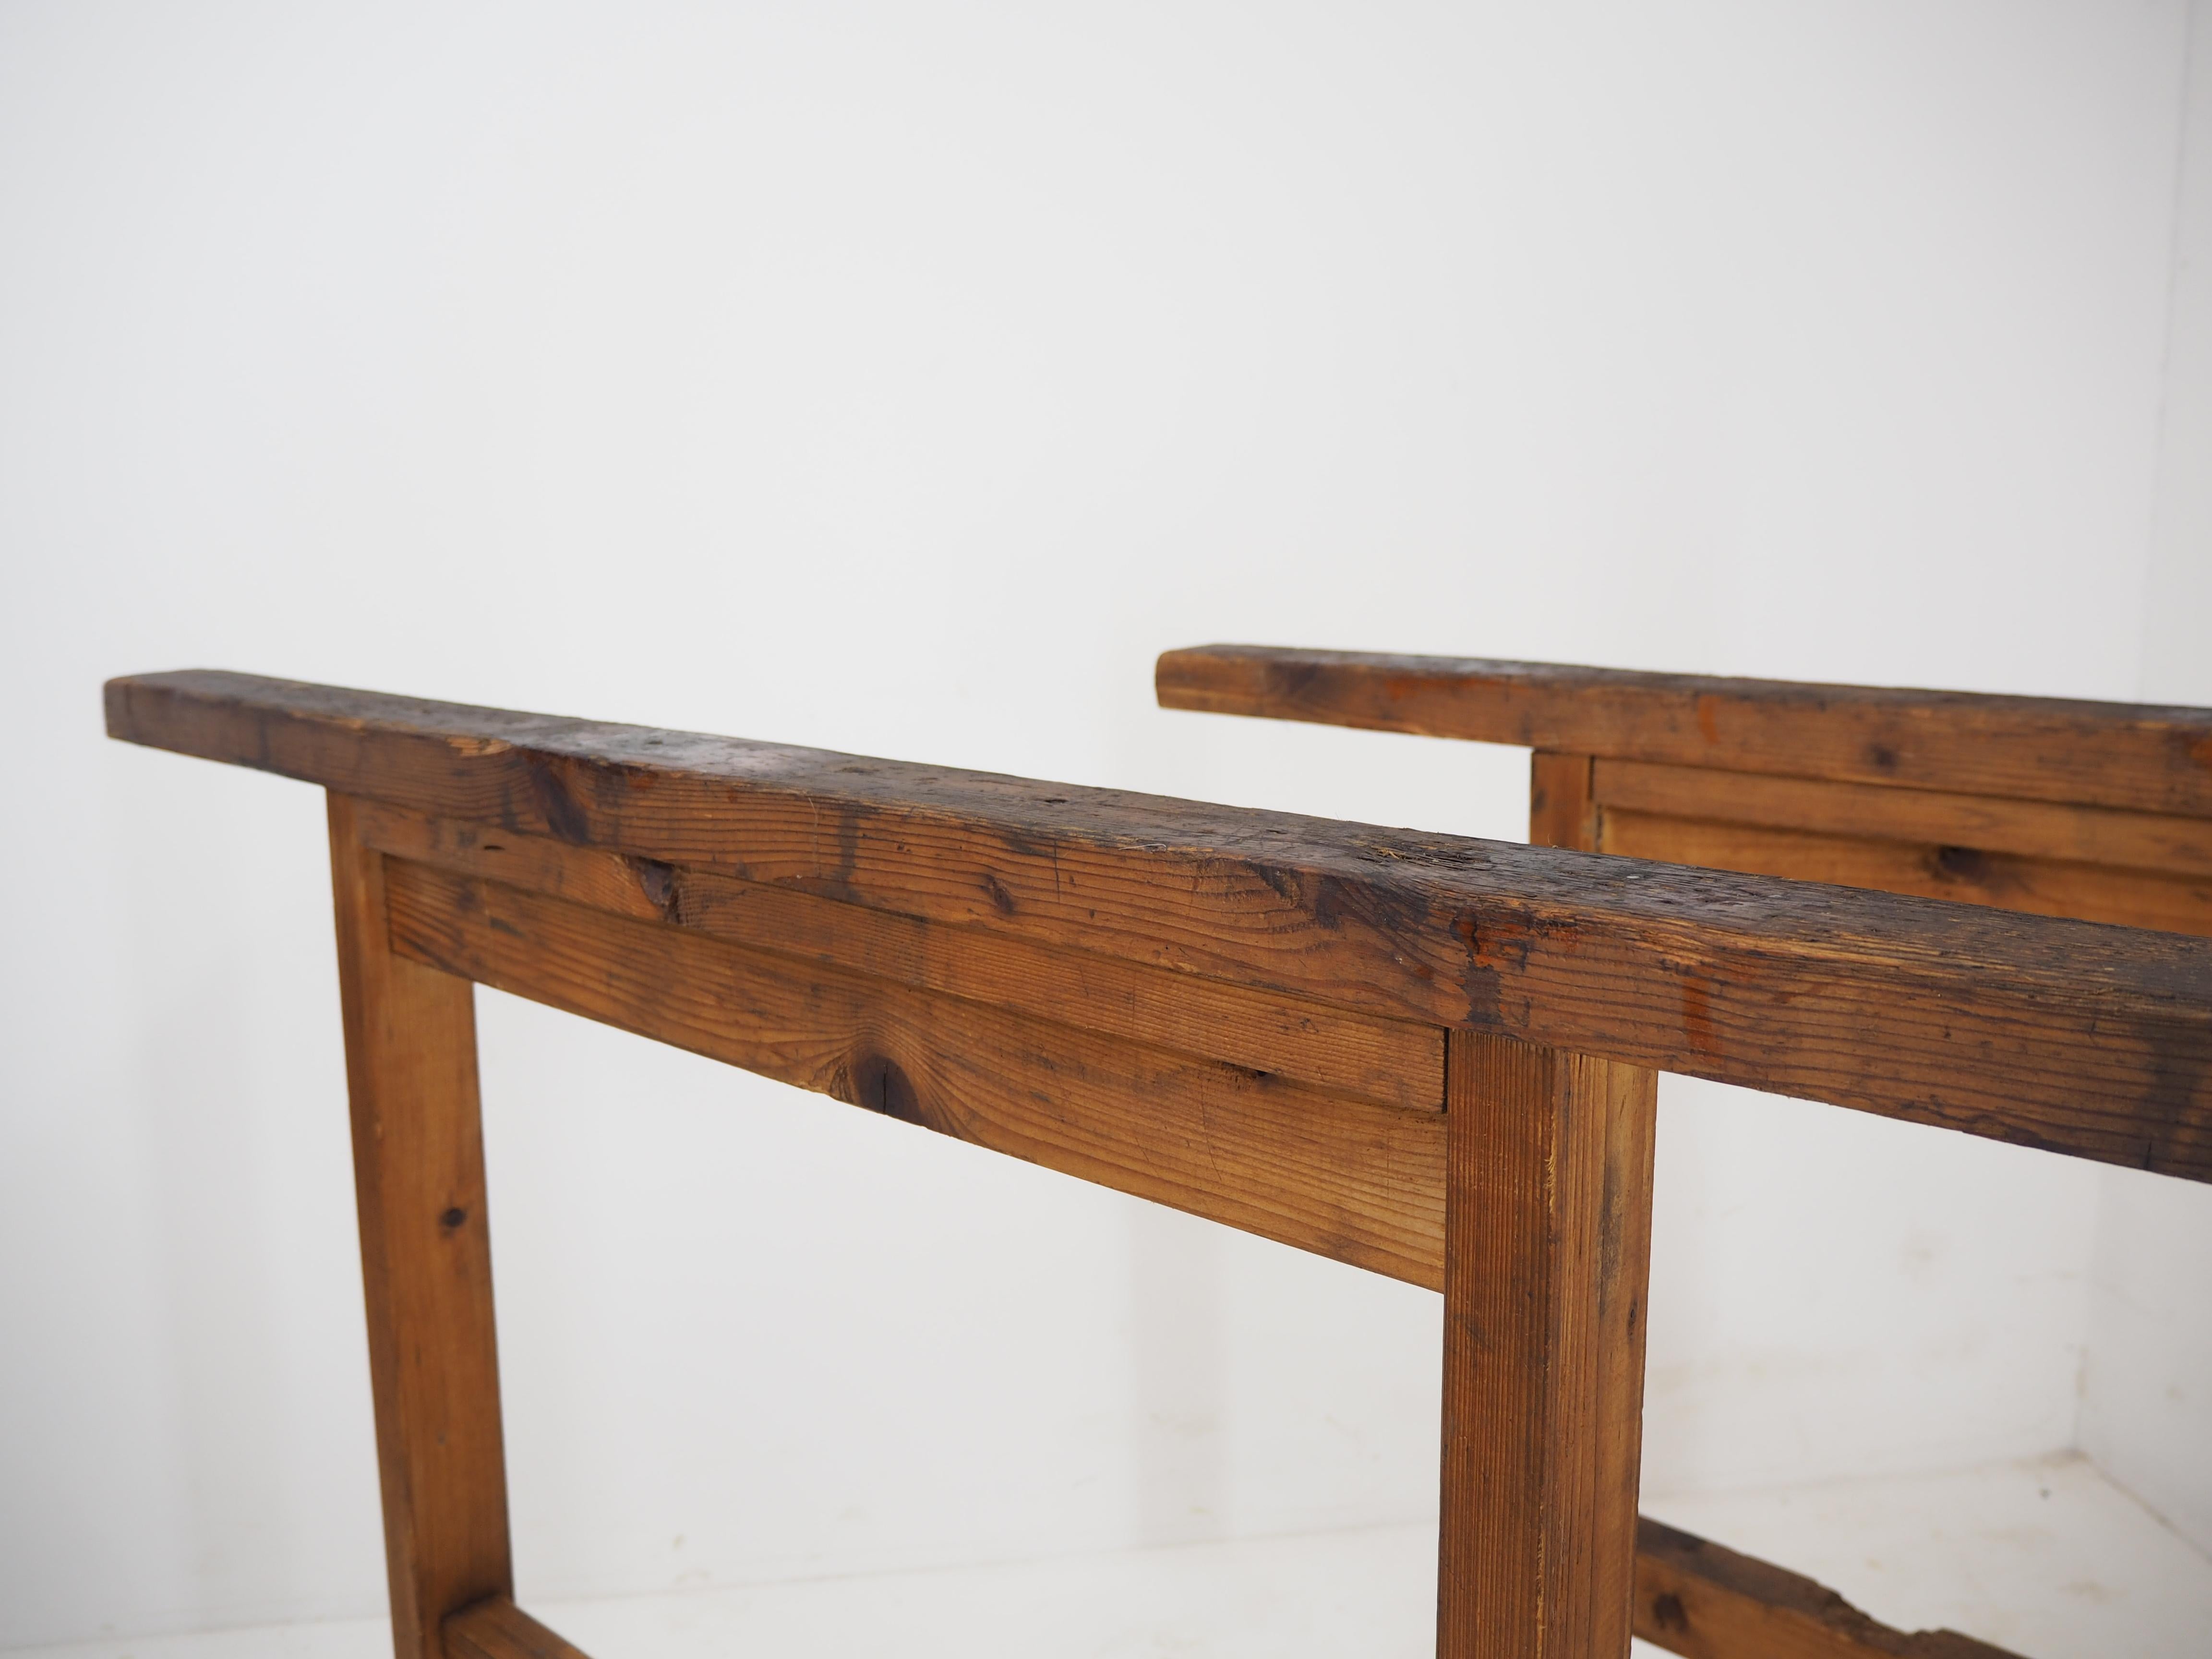 Pair of Industrial Wood Trestle Table Bases, Early 20th Century For Sale 4